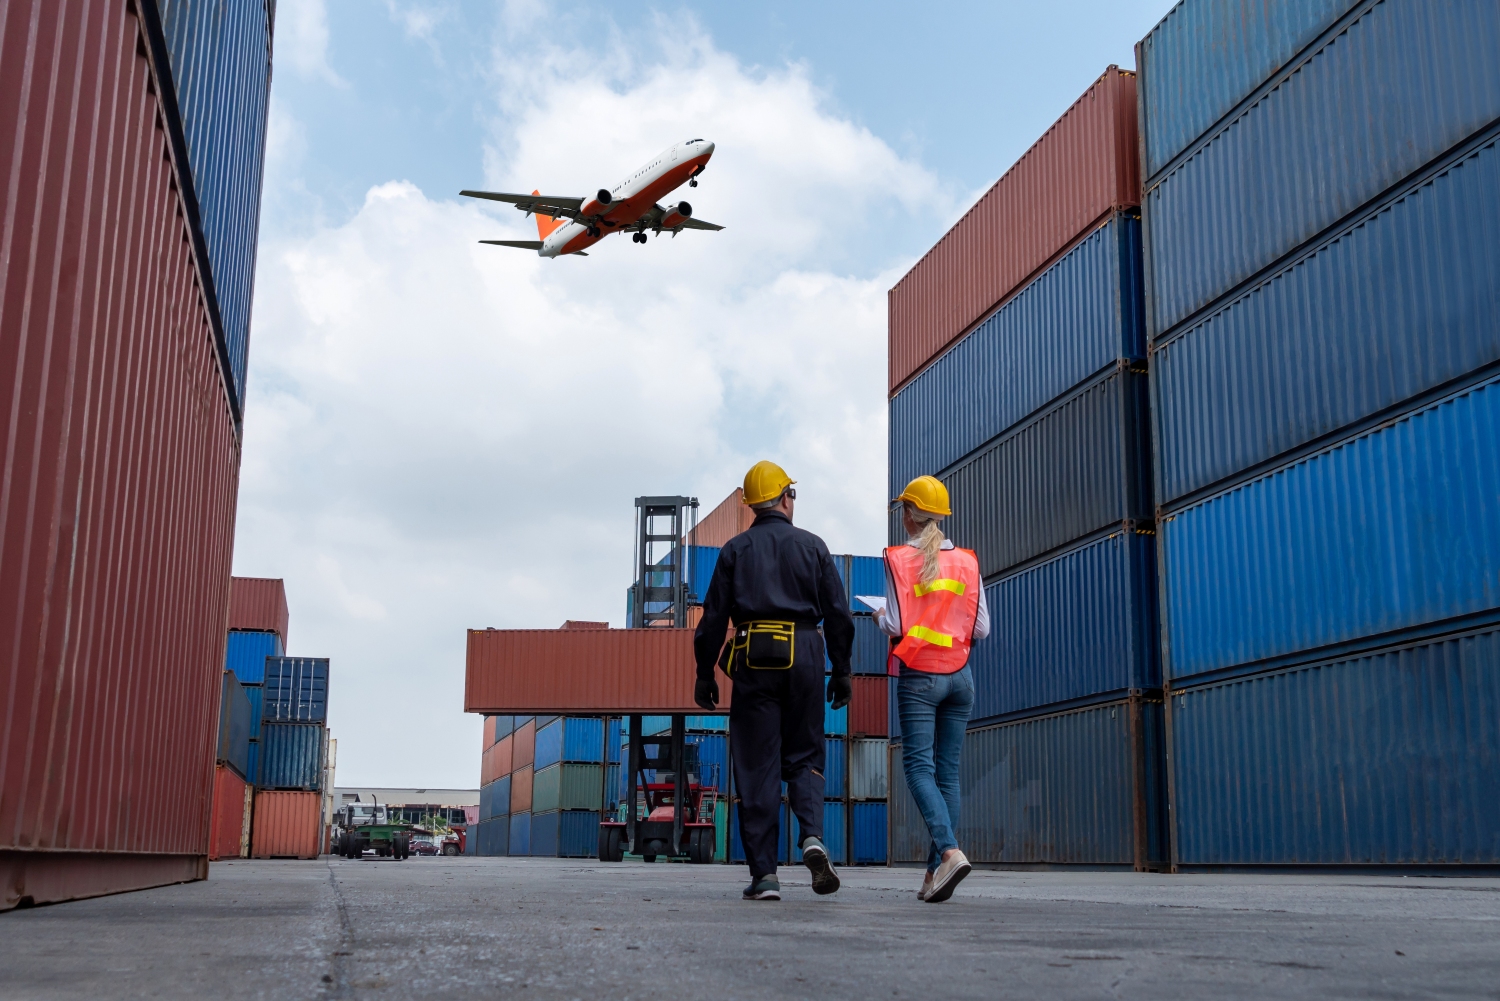 Two engineers at a shipping container port with a plane flying overhead